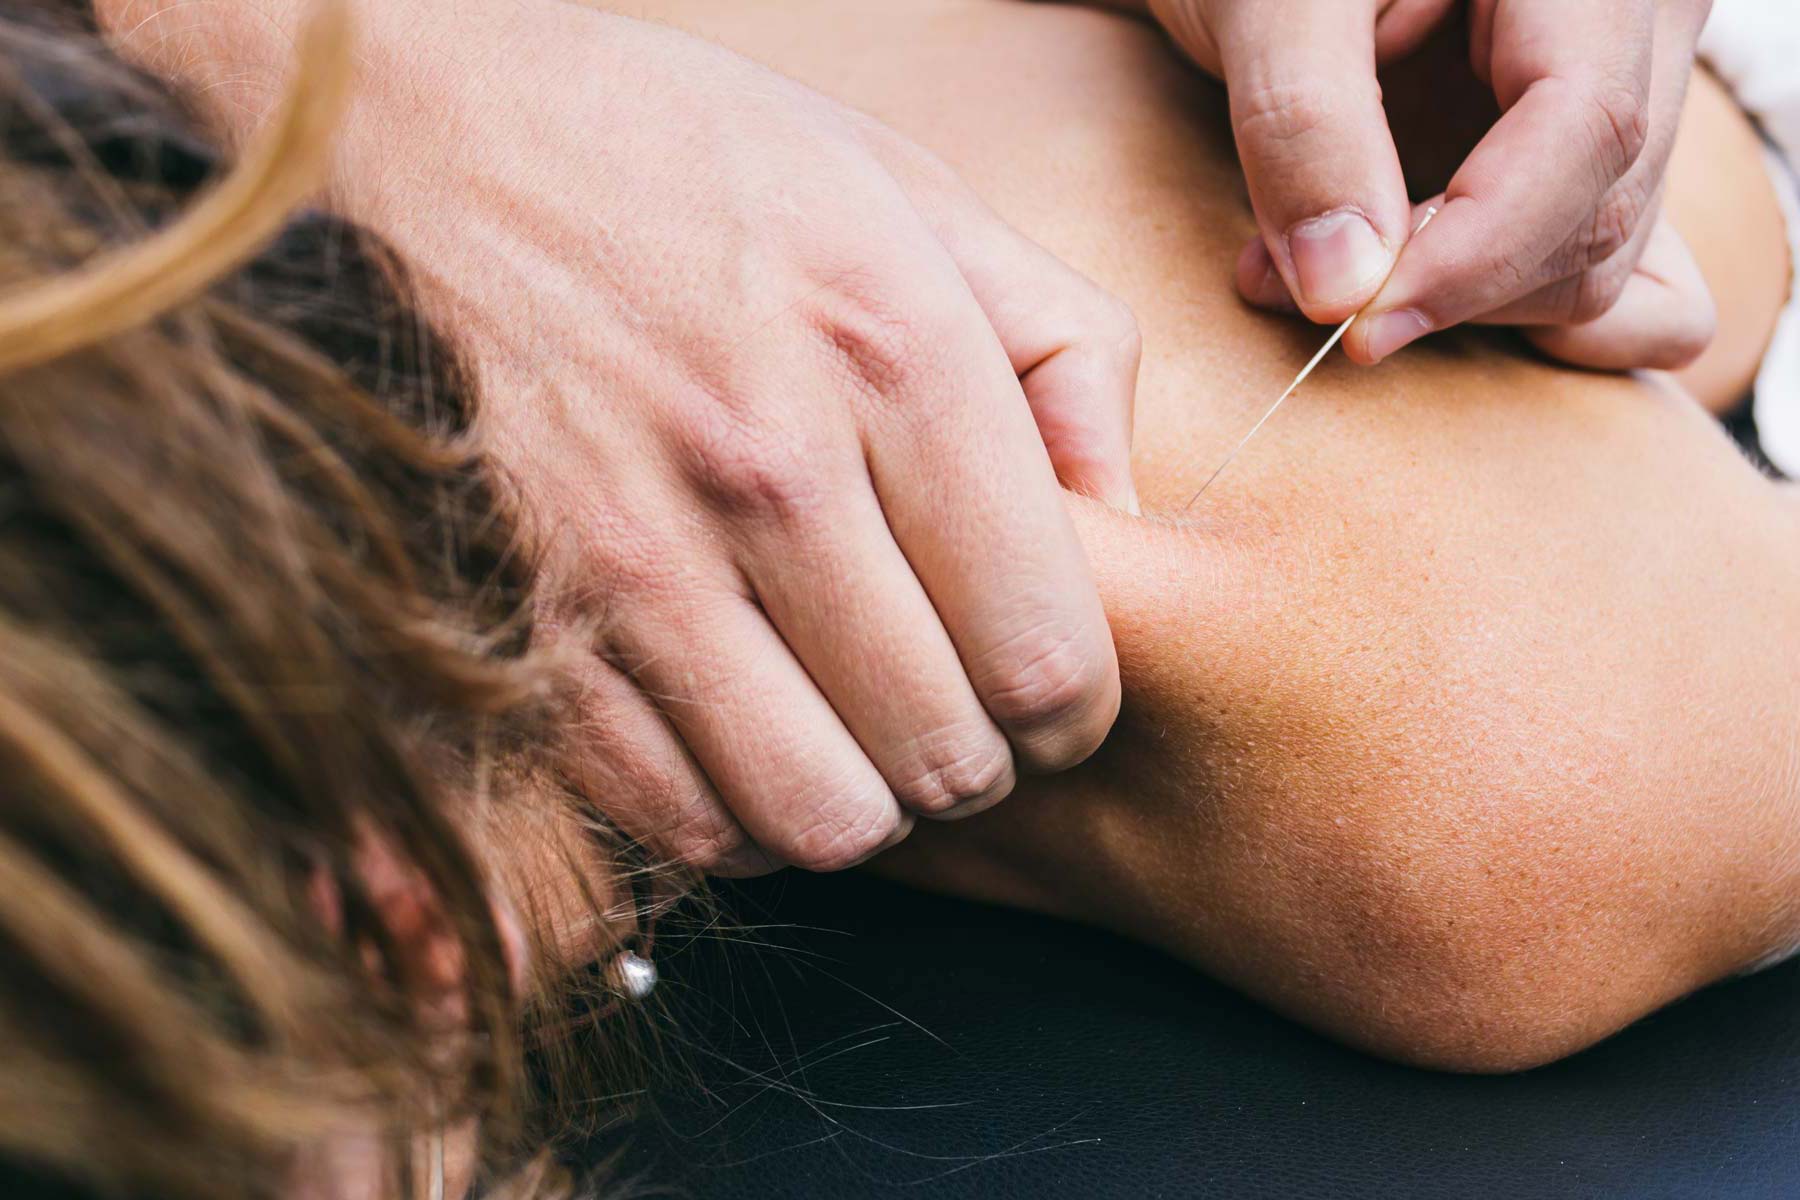 patient getting acupunctured with needle